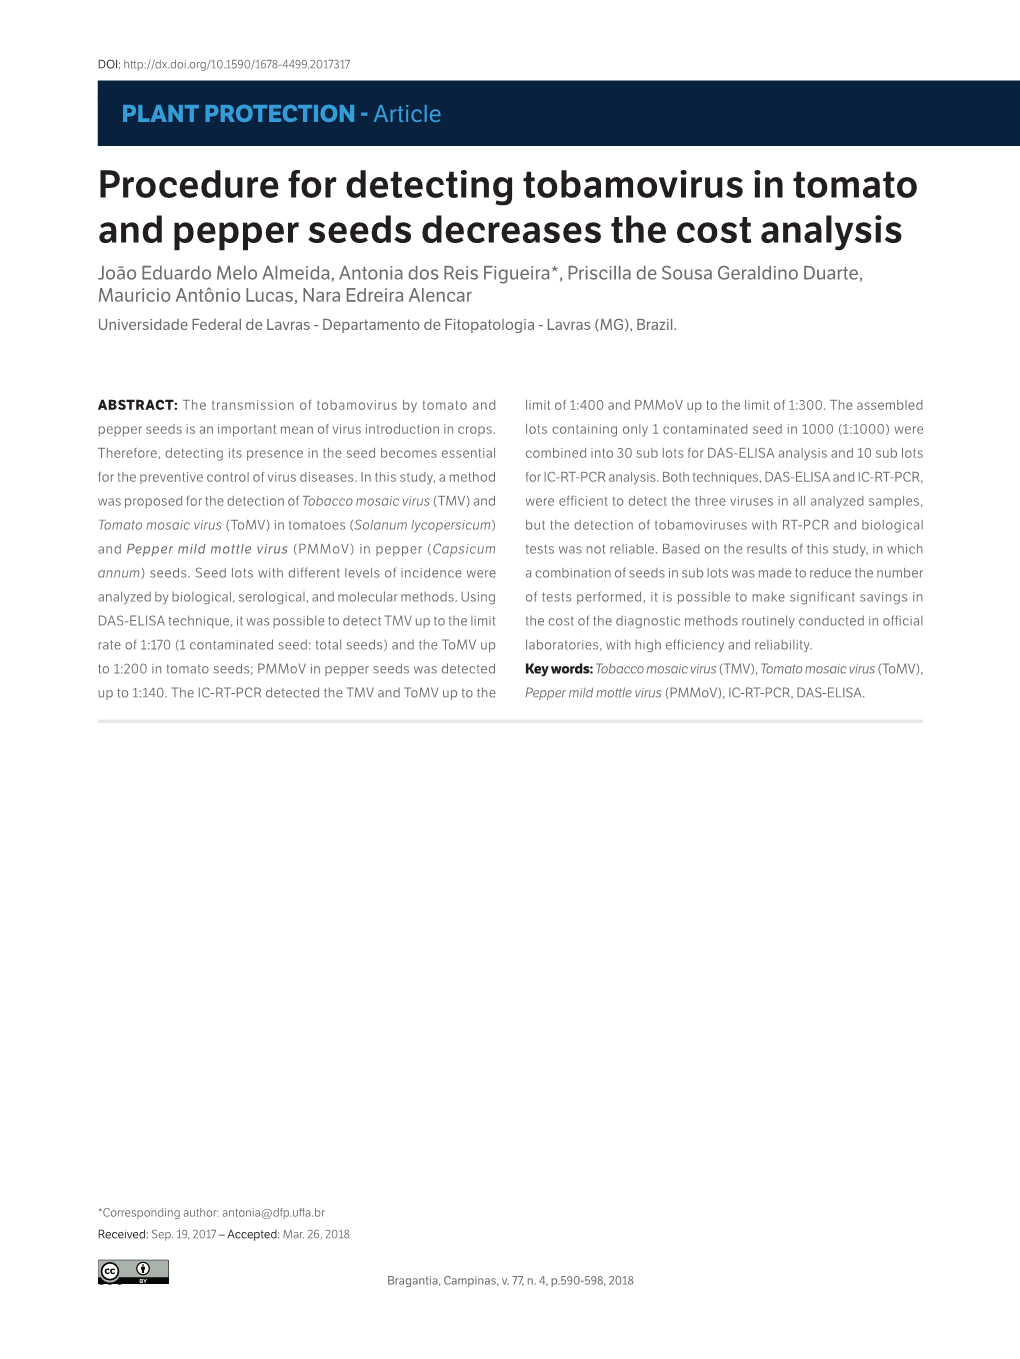 Procedure for Detecting Tobamovirus in Tomato and Pepper Seeds